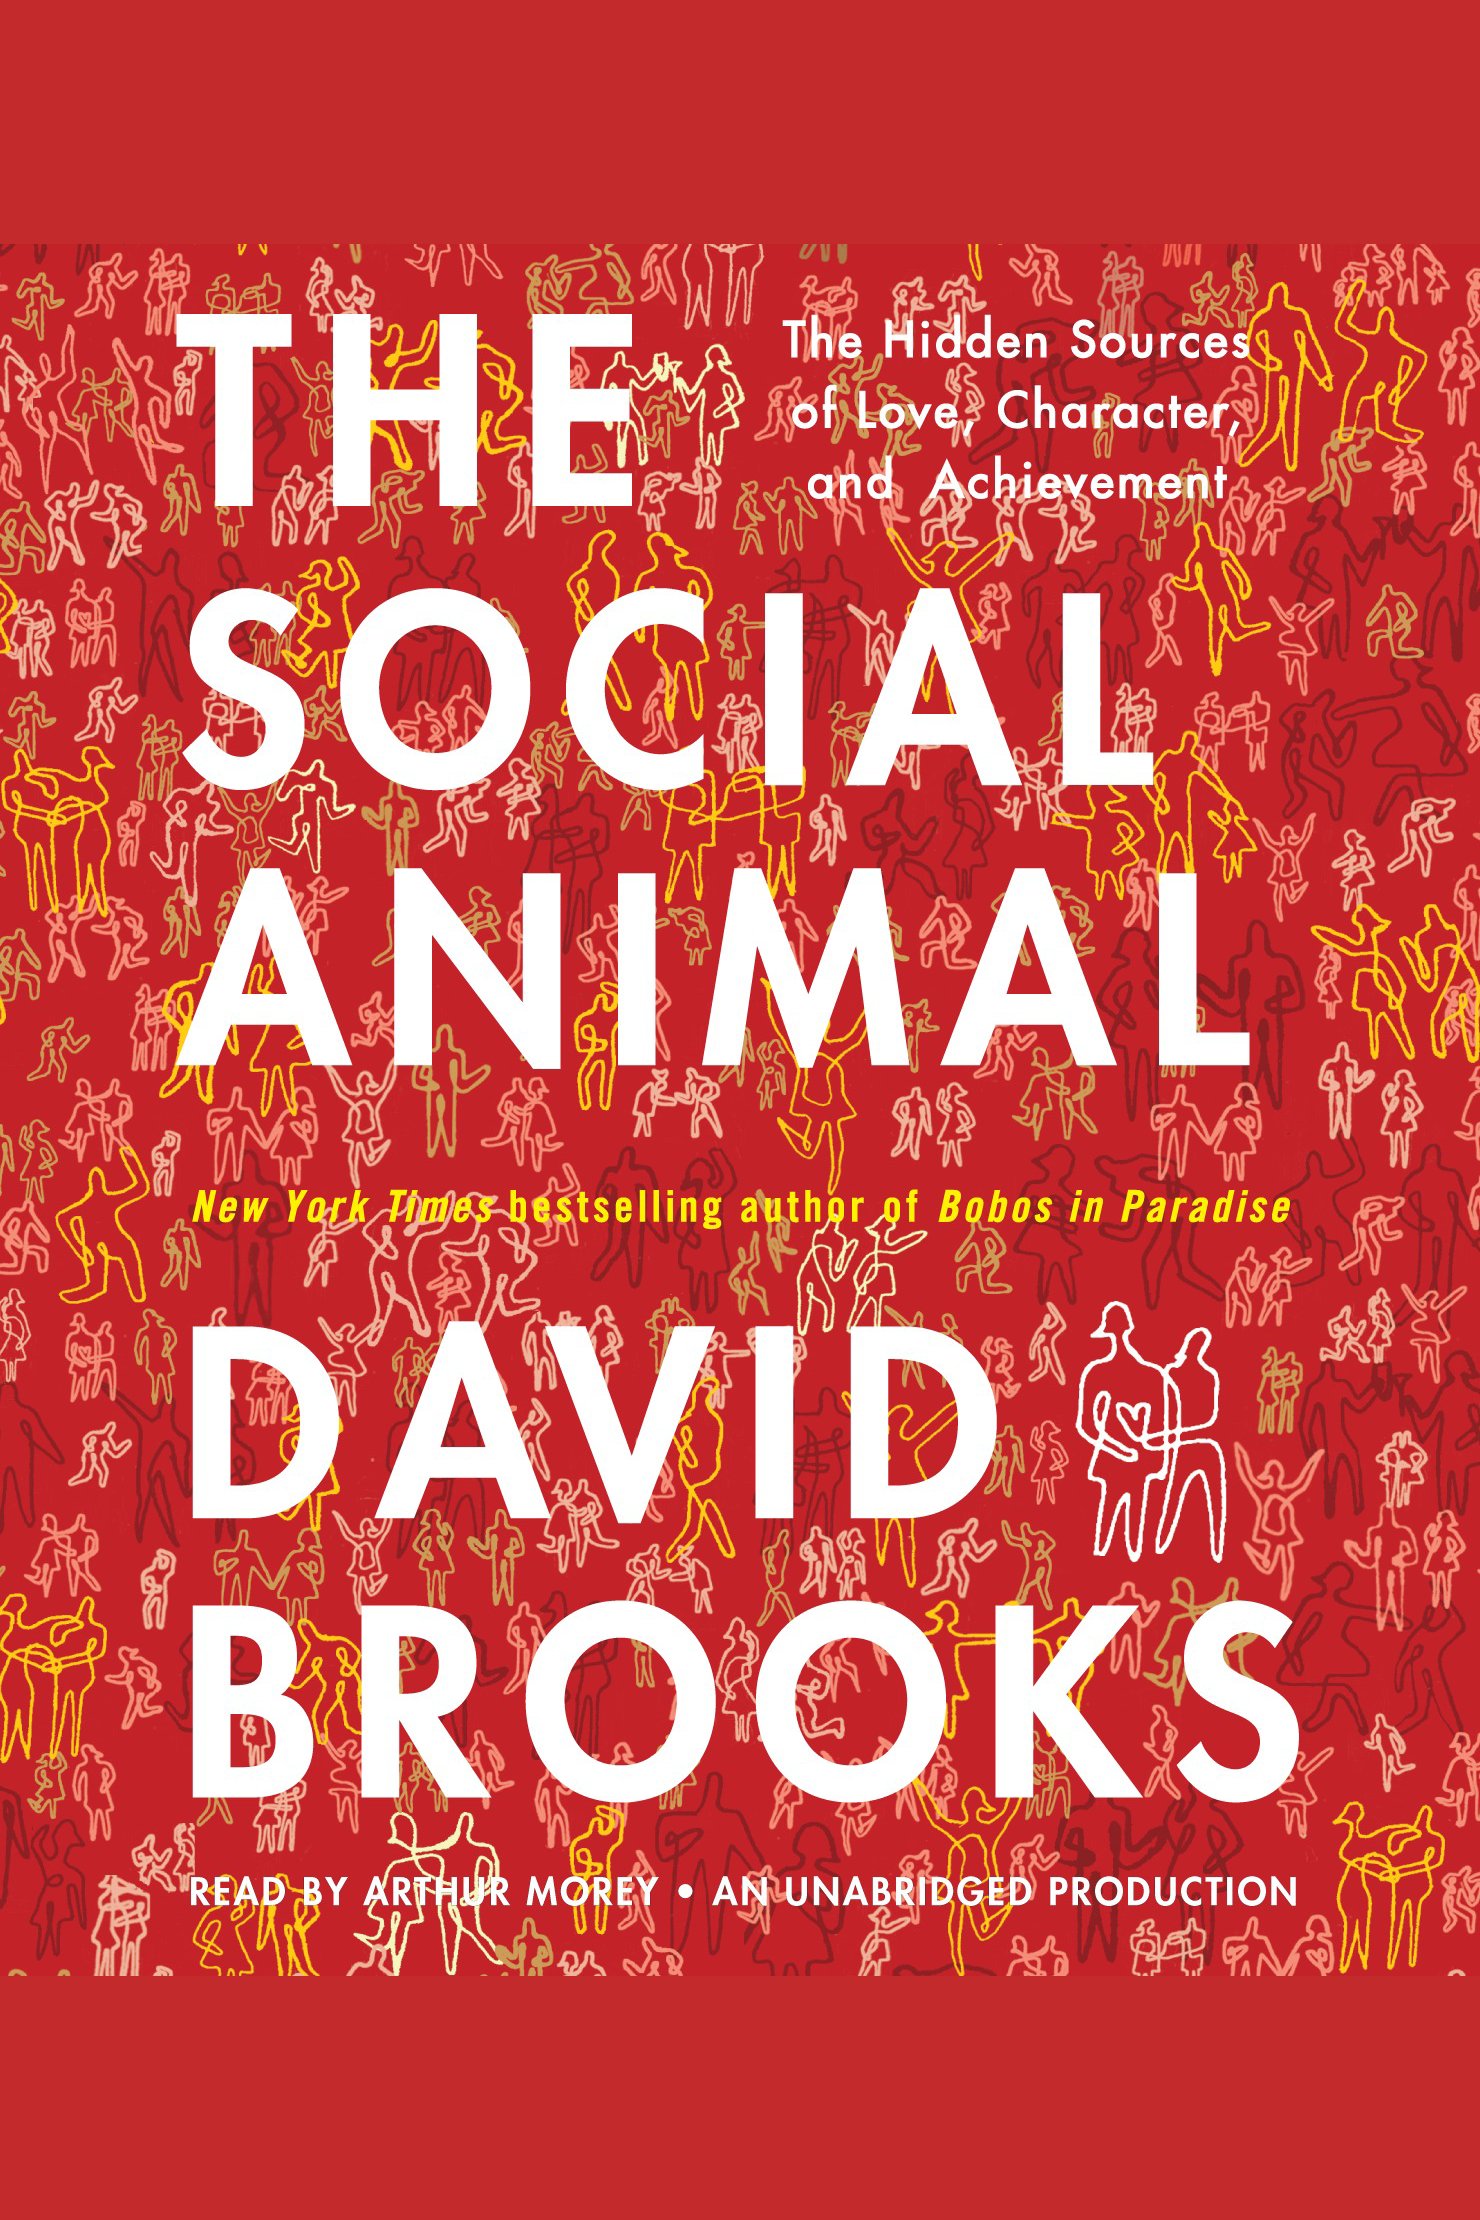 The social animal the hidden sources of love, character, and achievement cover image